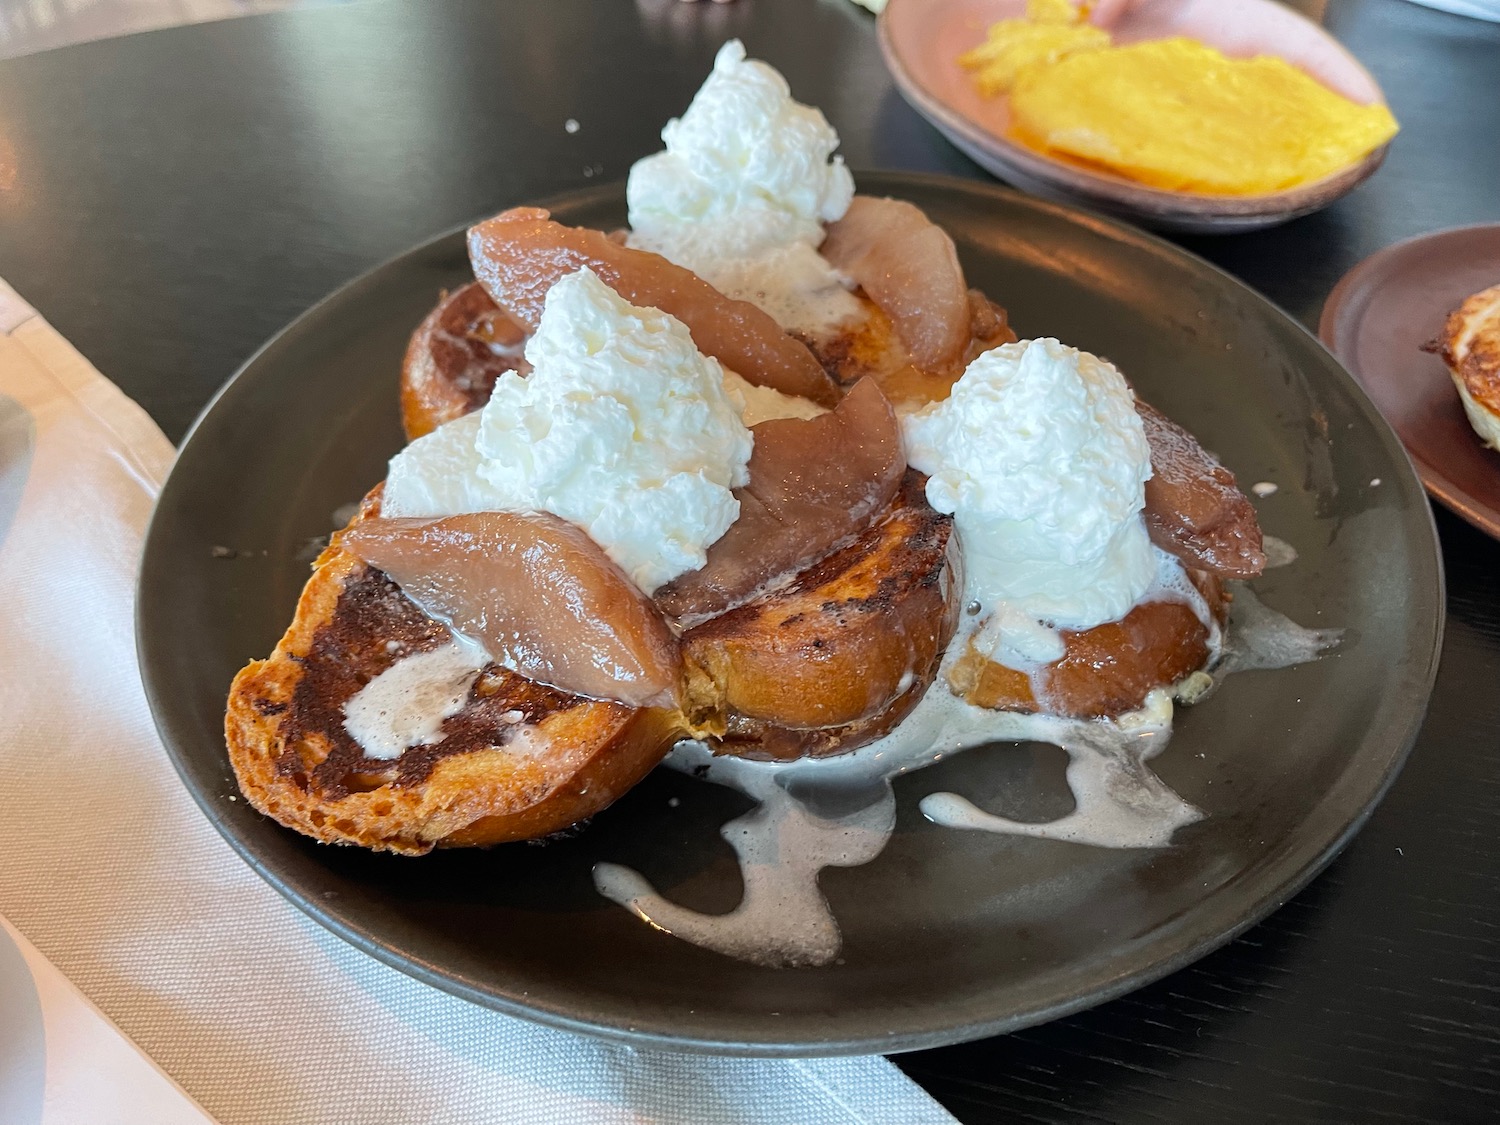 a plate of food with whipped cream and pears